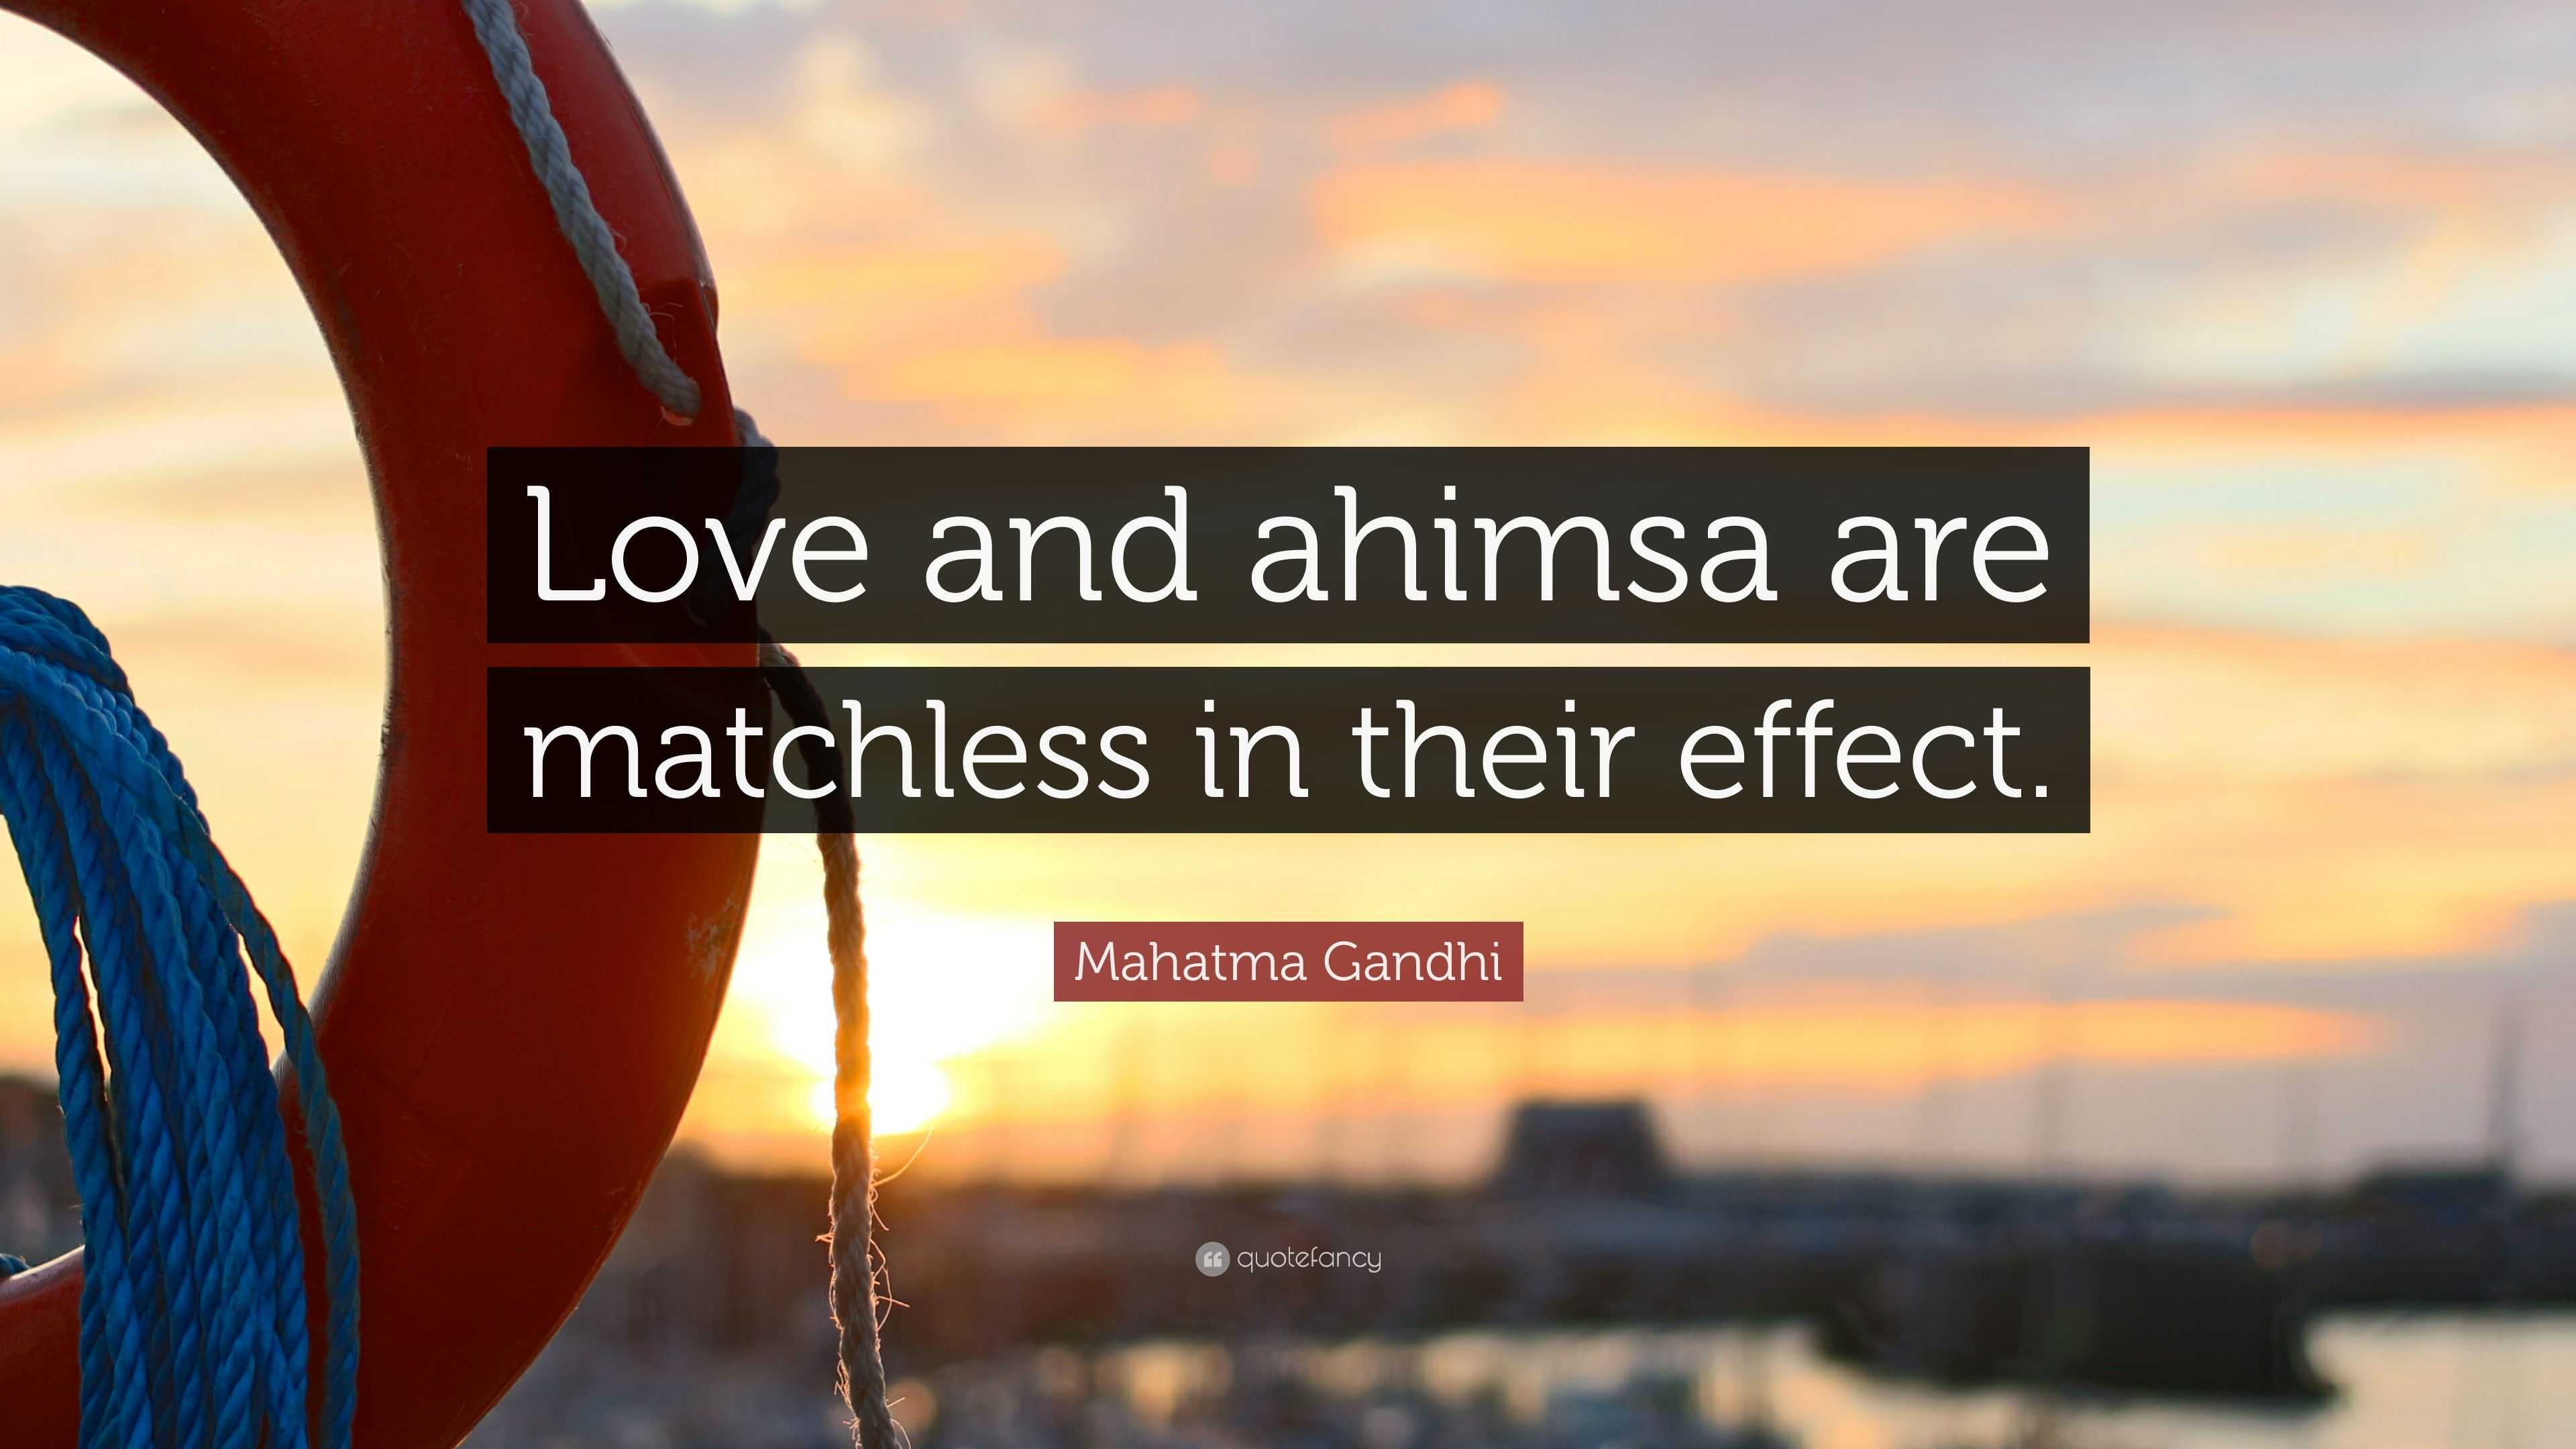 Mahatma Gandhi Quote: “Love and ahimsa are matchless in their effect.”